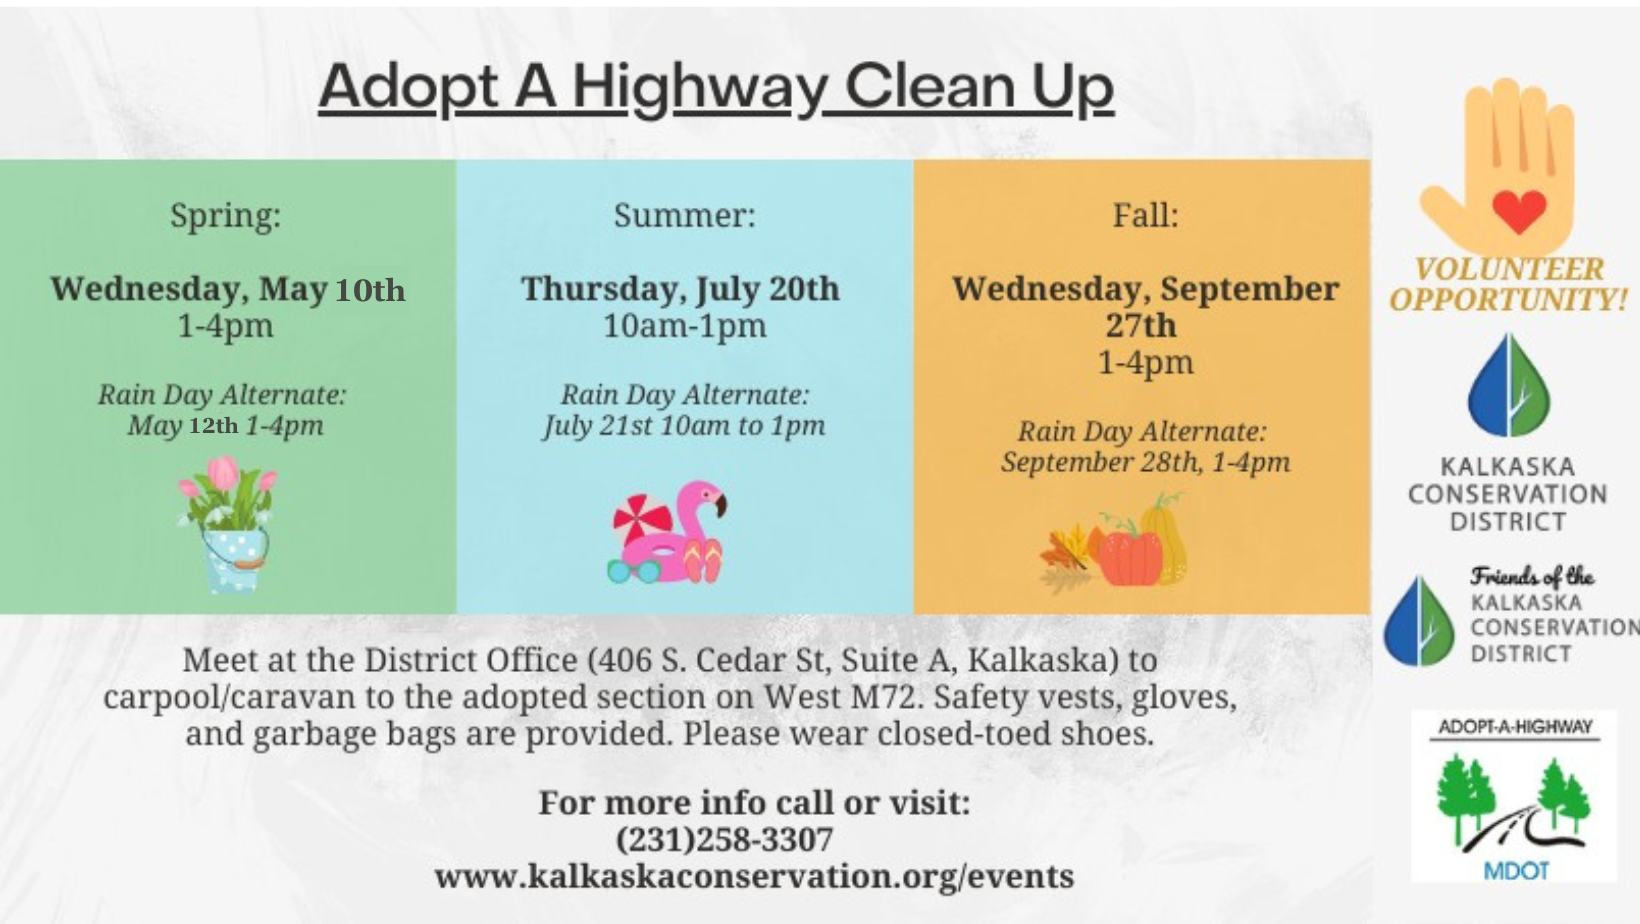 Spring 2023 Adopt a Highway Clean Up with the Friends of the Kalkaska